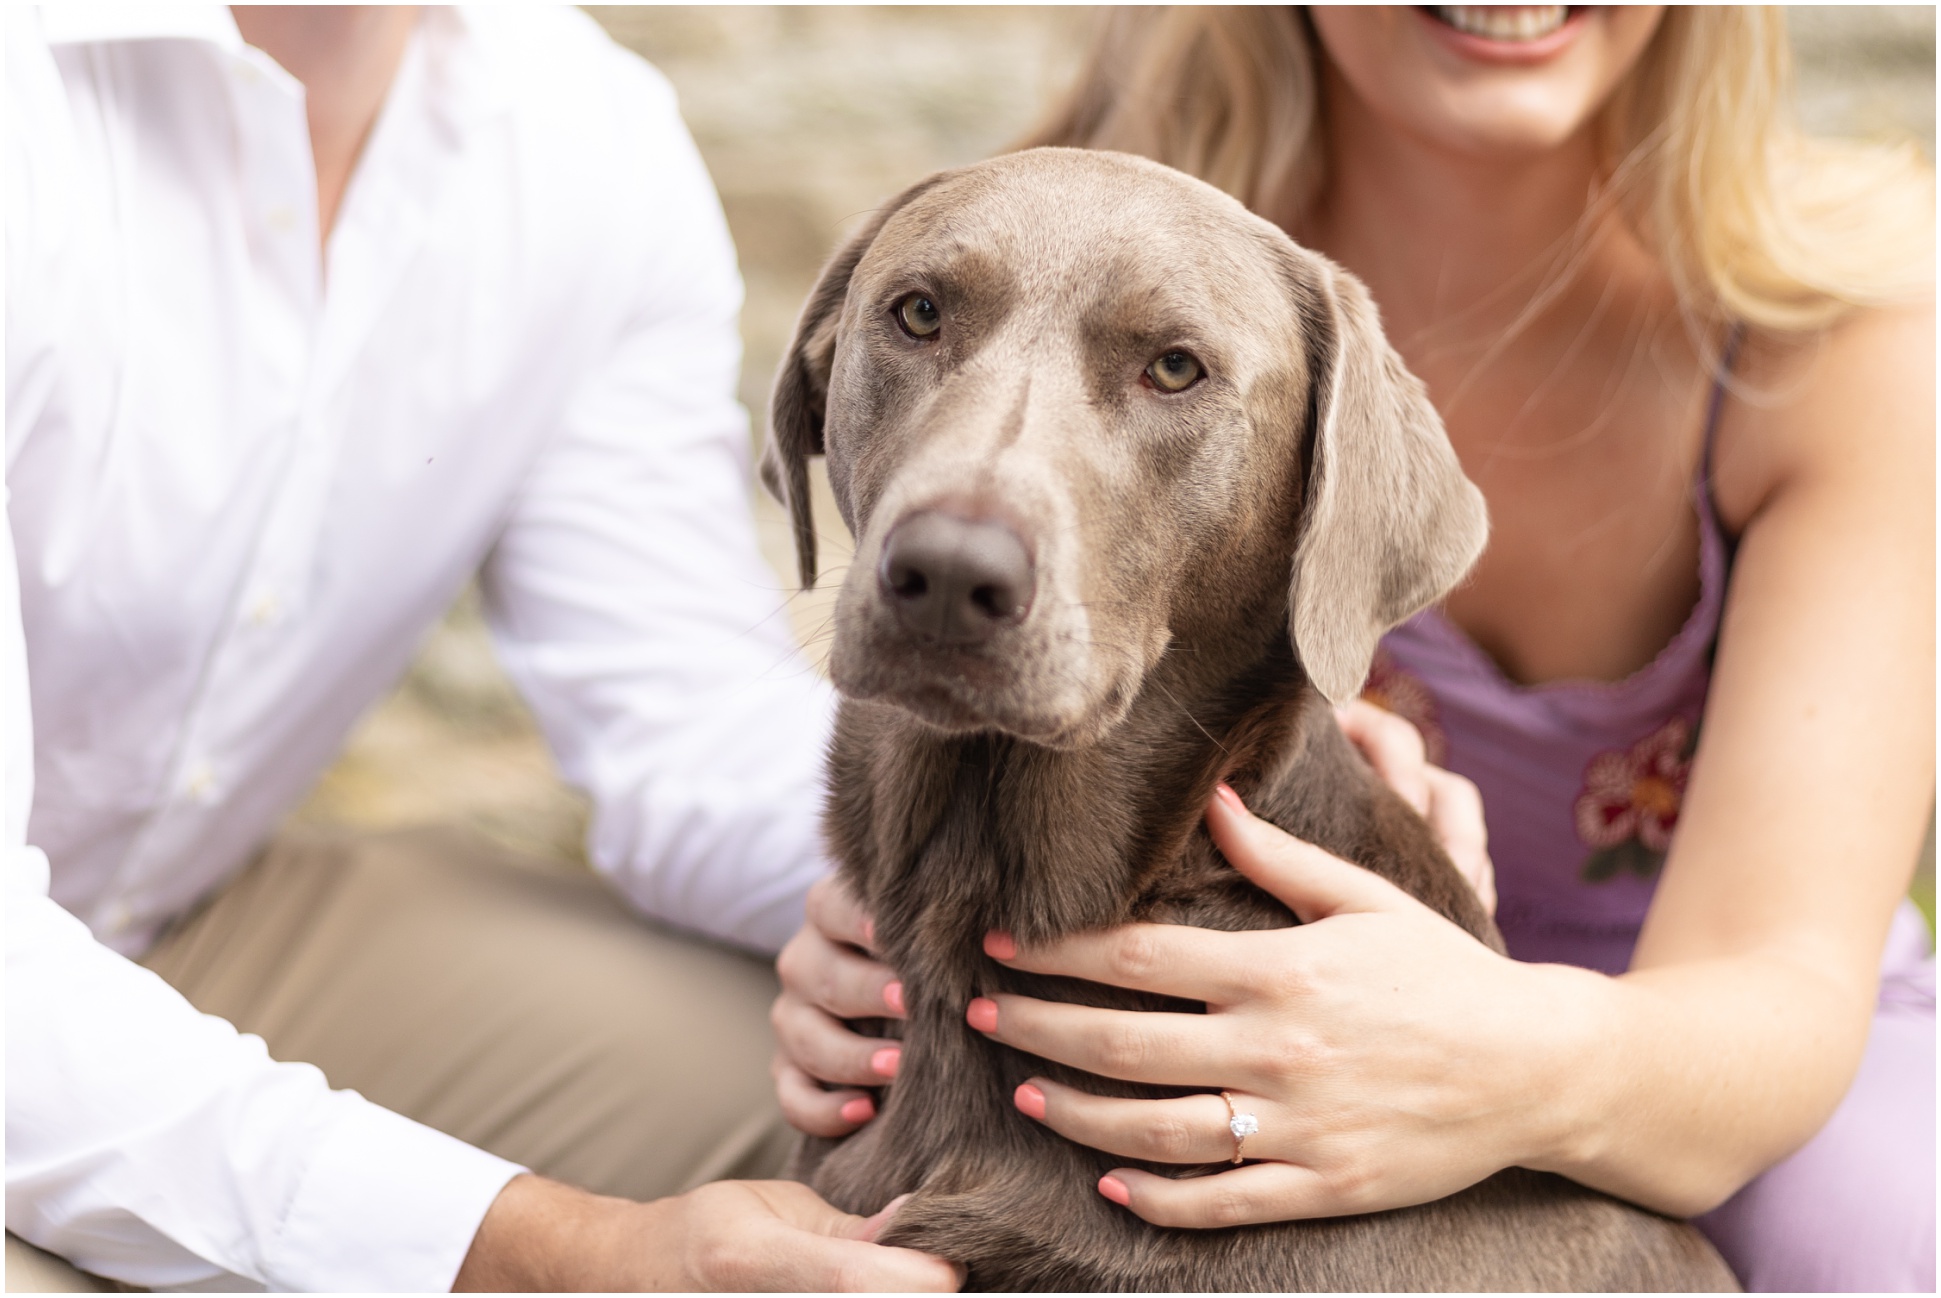 The couples dog, Kona, from their Lavender Engagement at Susquehanna State Park